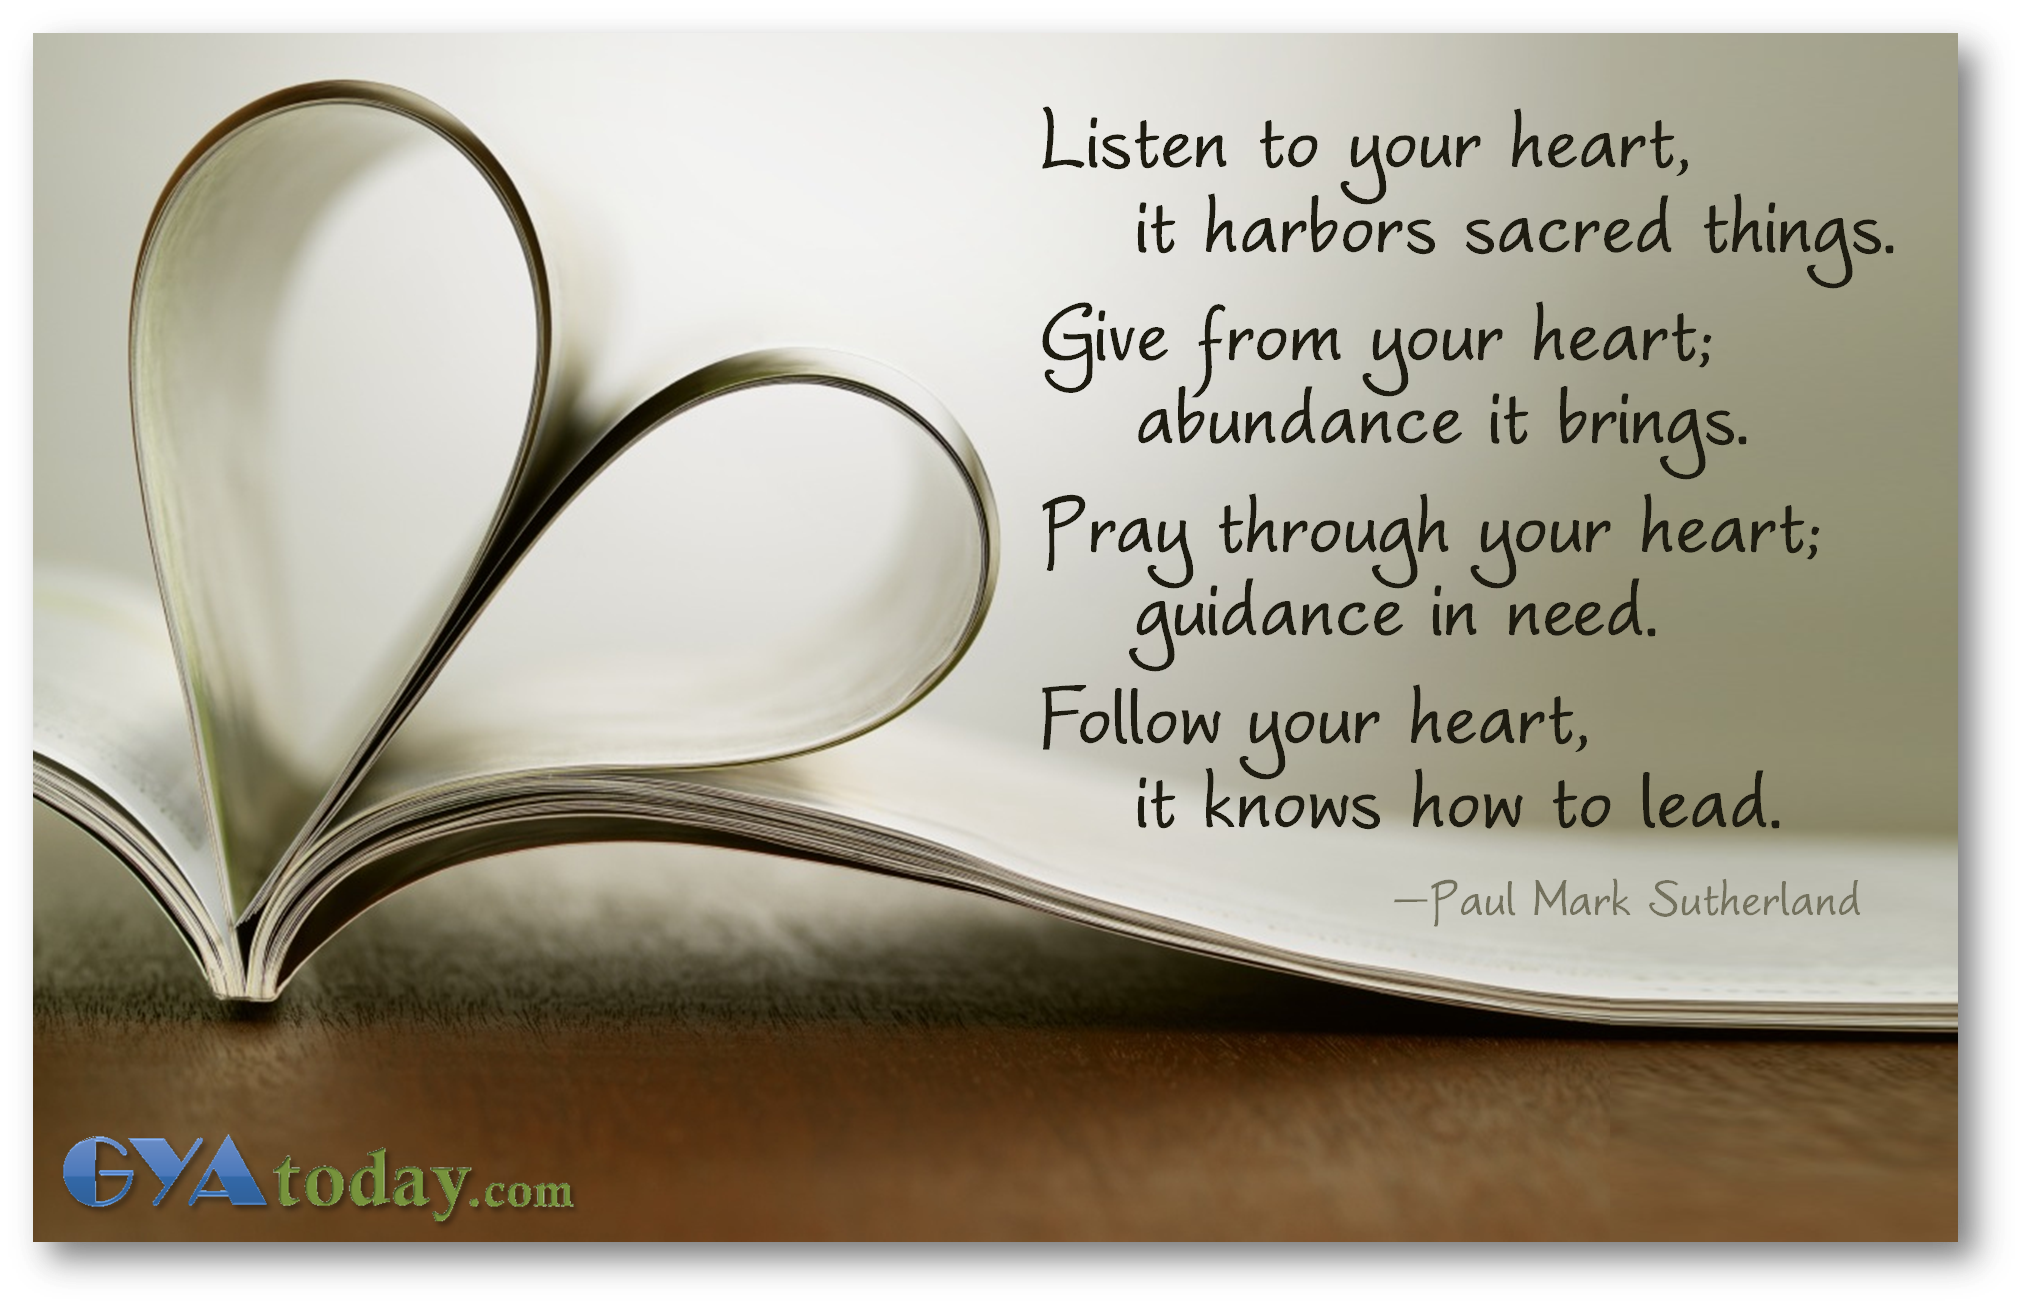 Follow Your Heart | GYA today